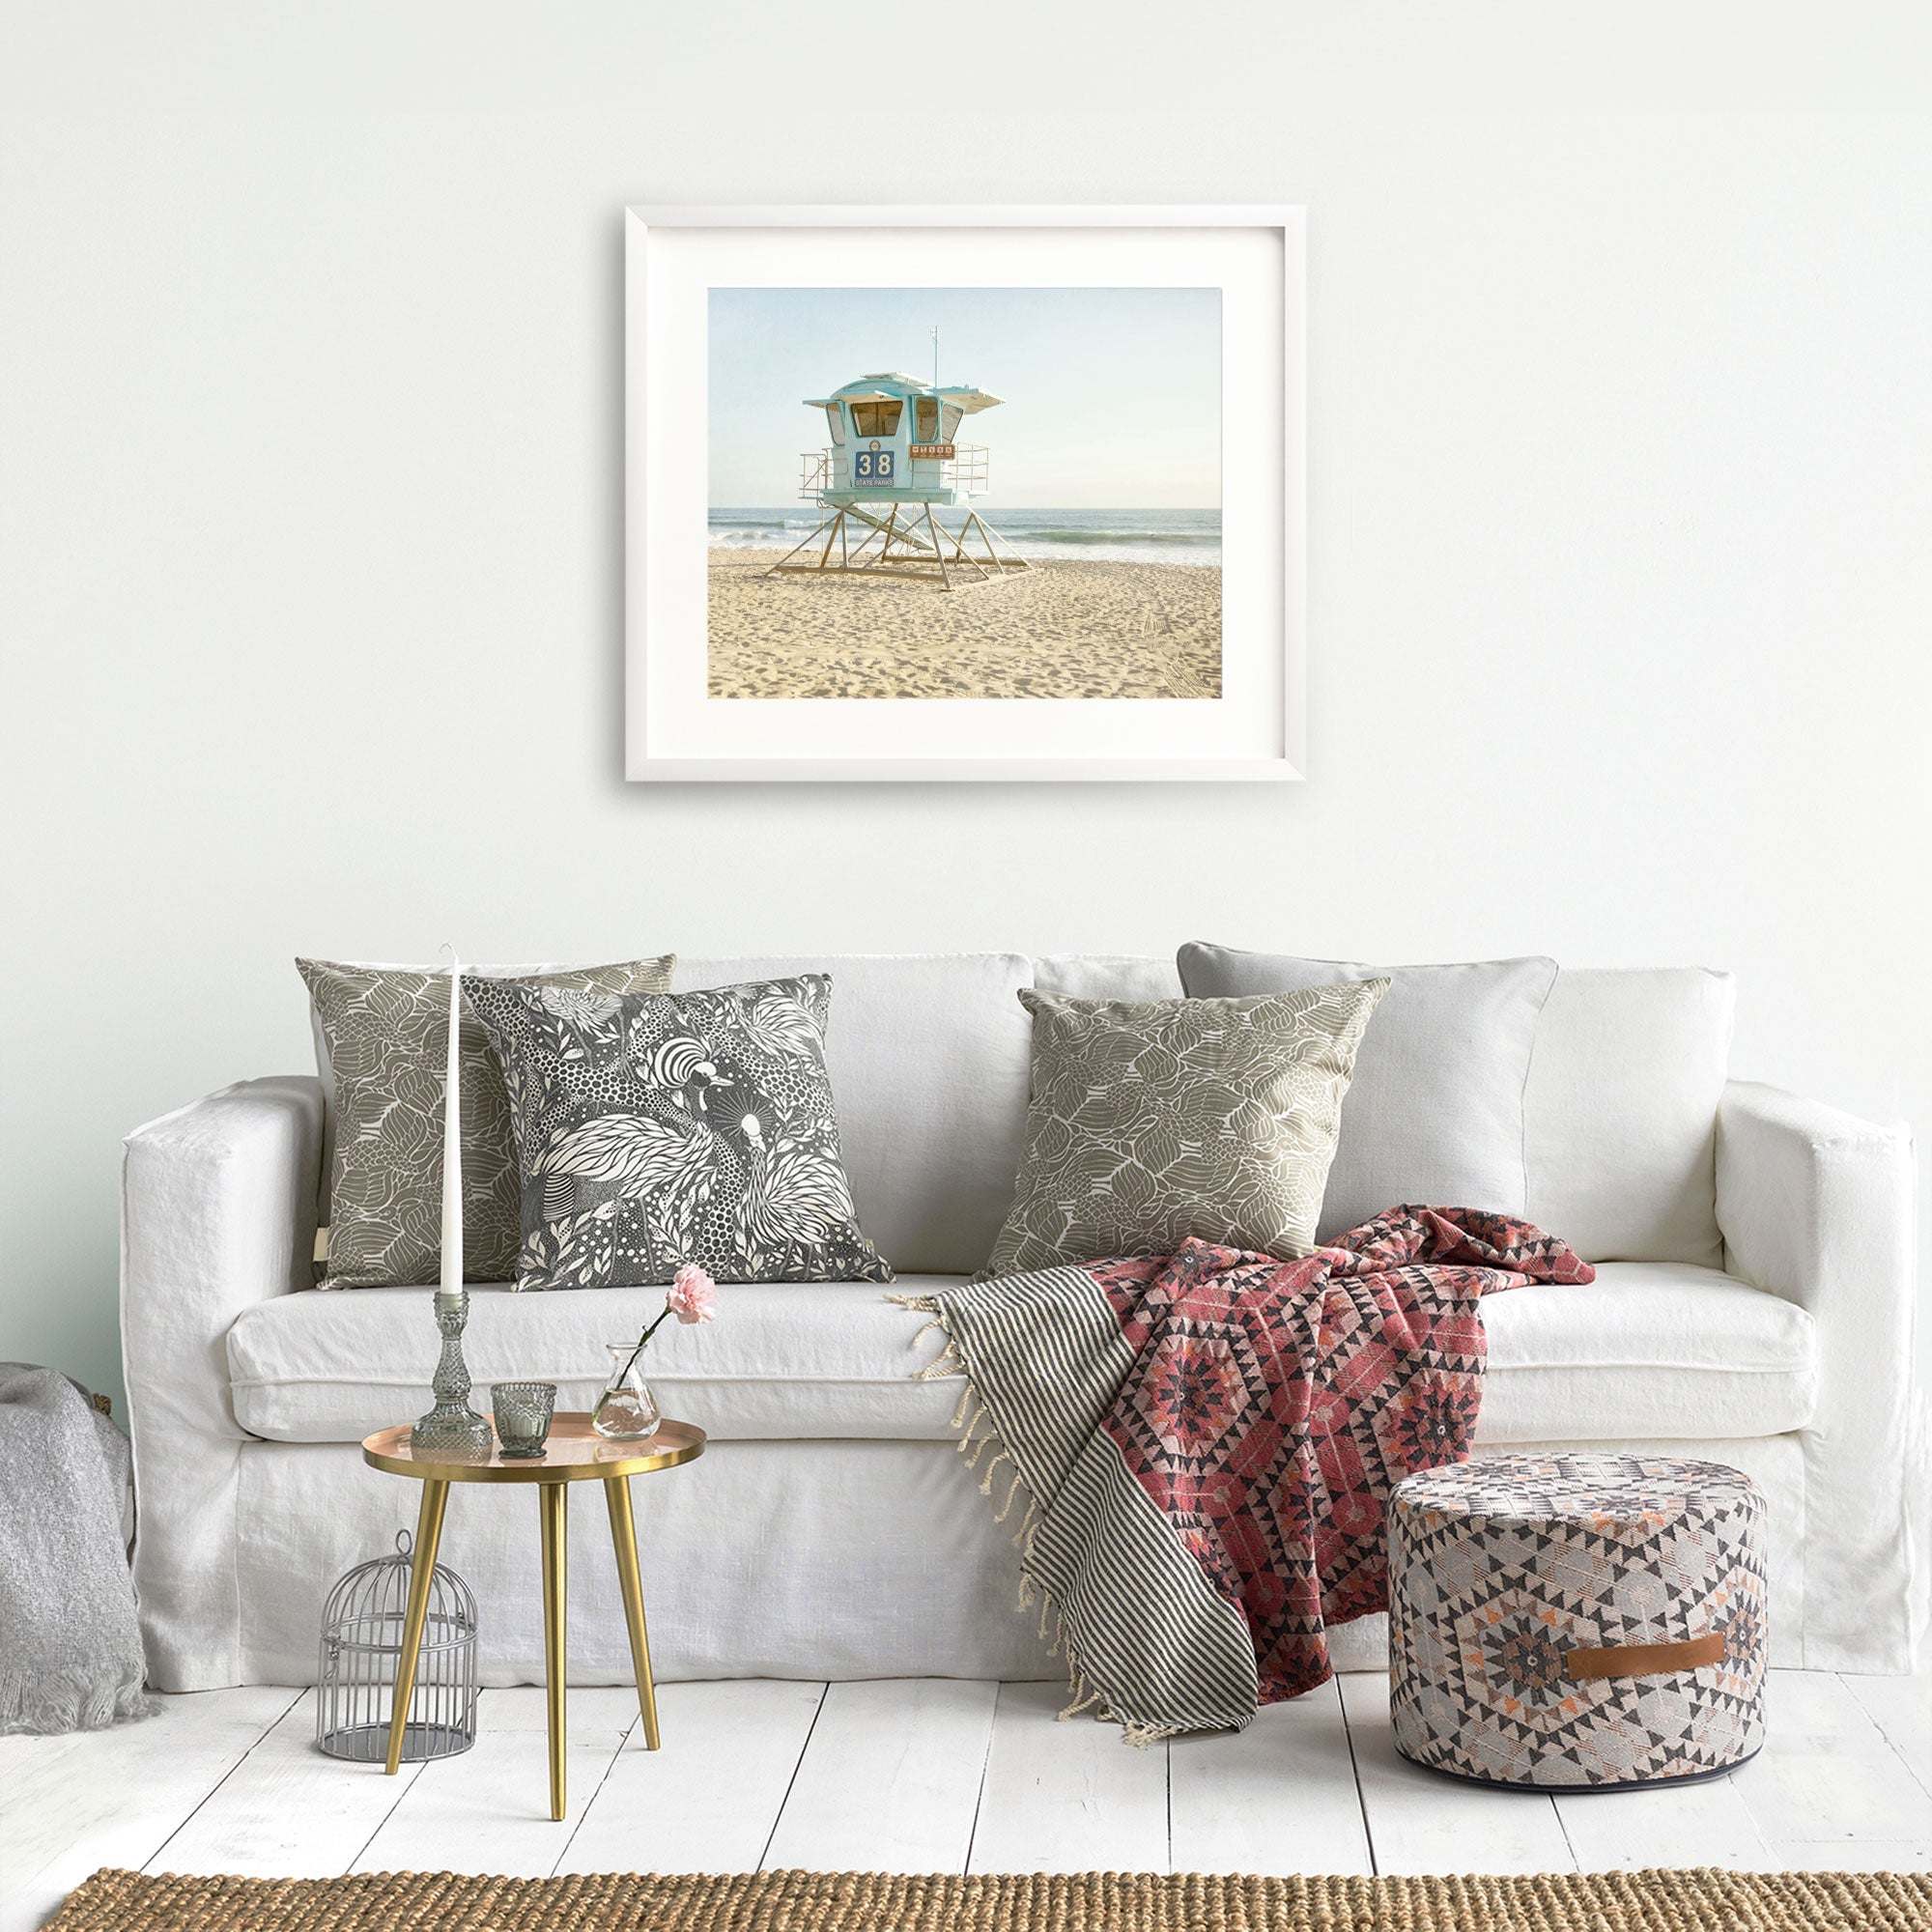 A cozy living room featuring a white sofa adorned with patterned cushions, a small table with decor, a wicker ottoman, and a framed print of the California Coastal Print, 'Carlsbad Lifeguard Tower' by Offley Green hanging on the wall.